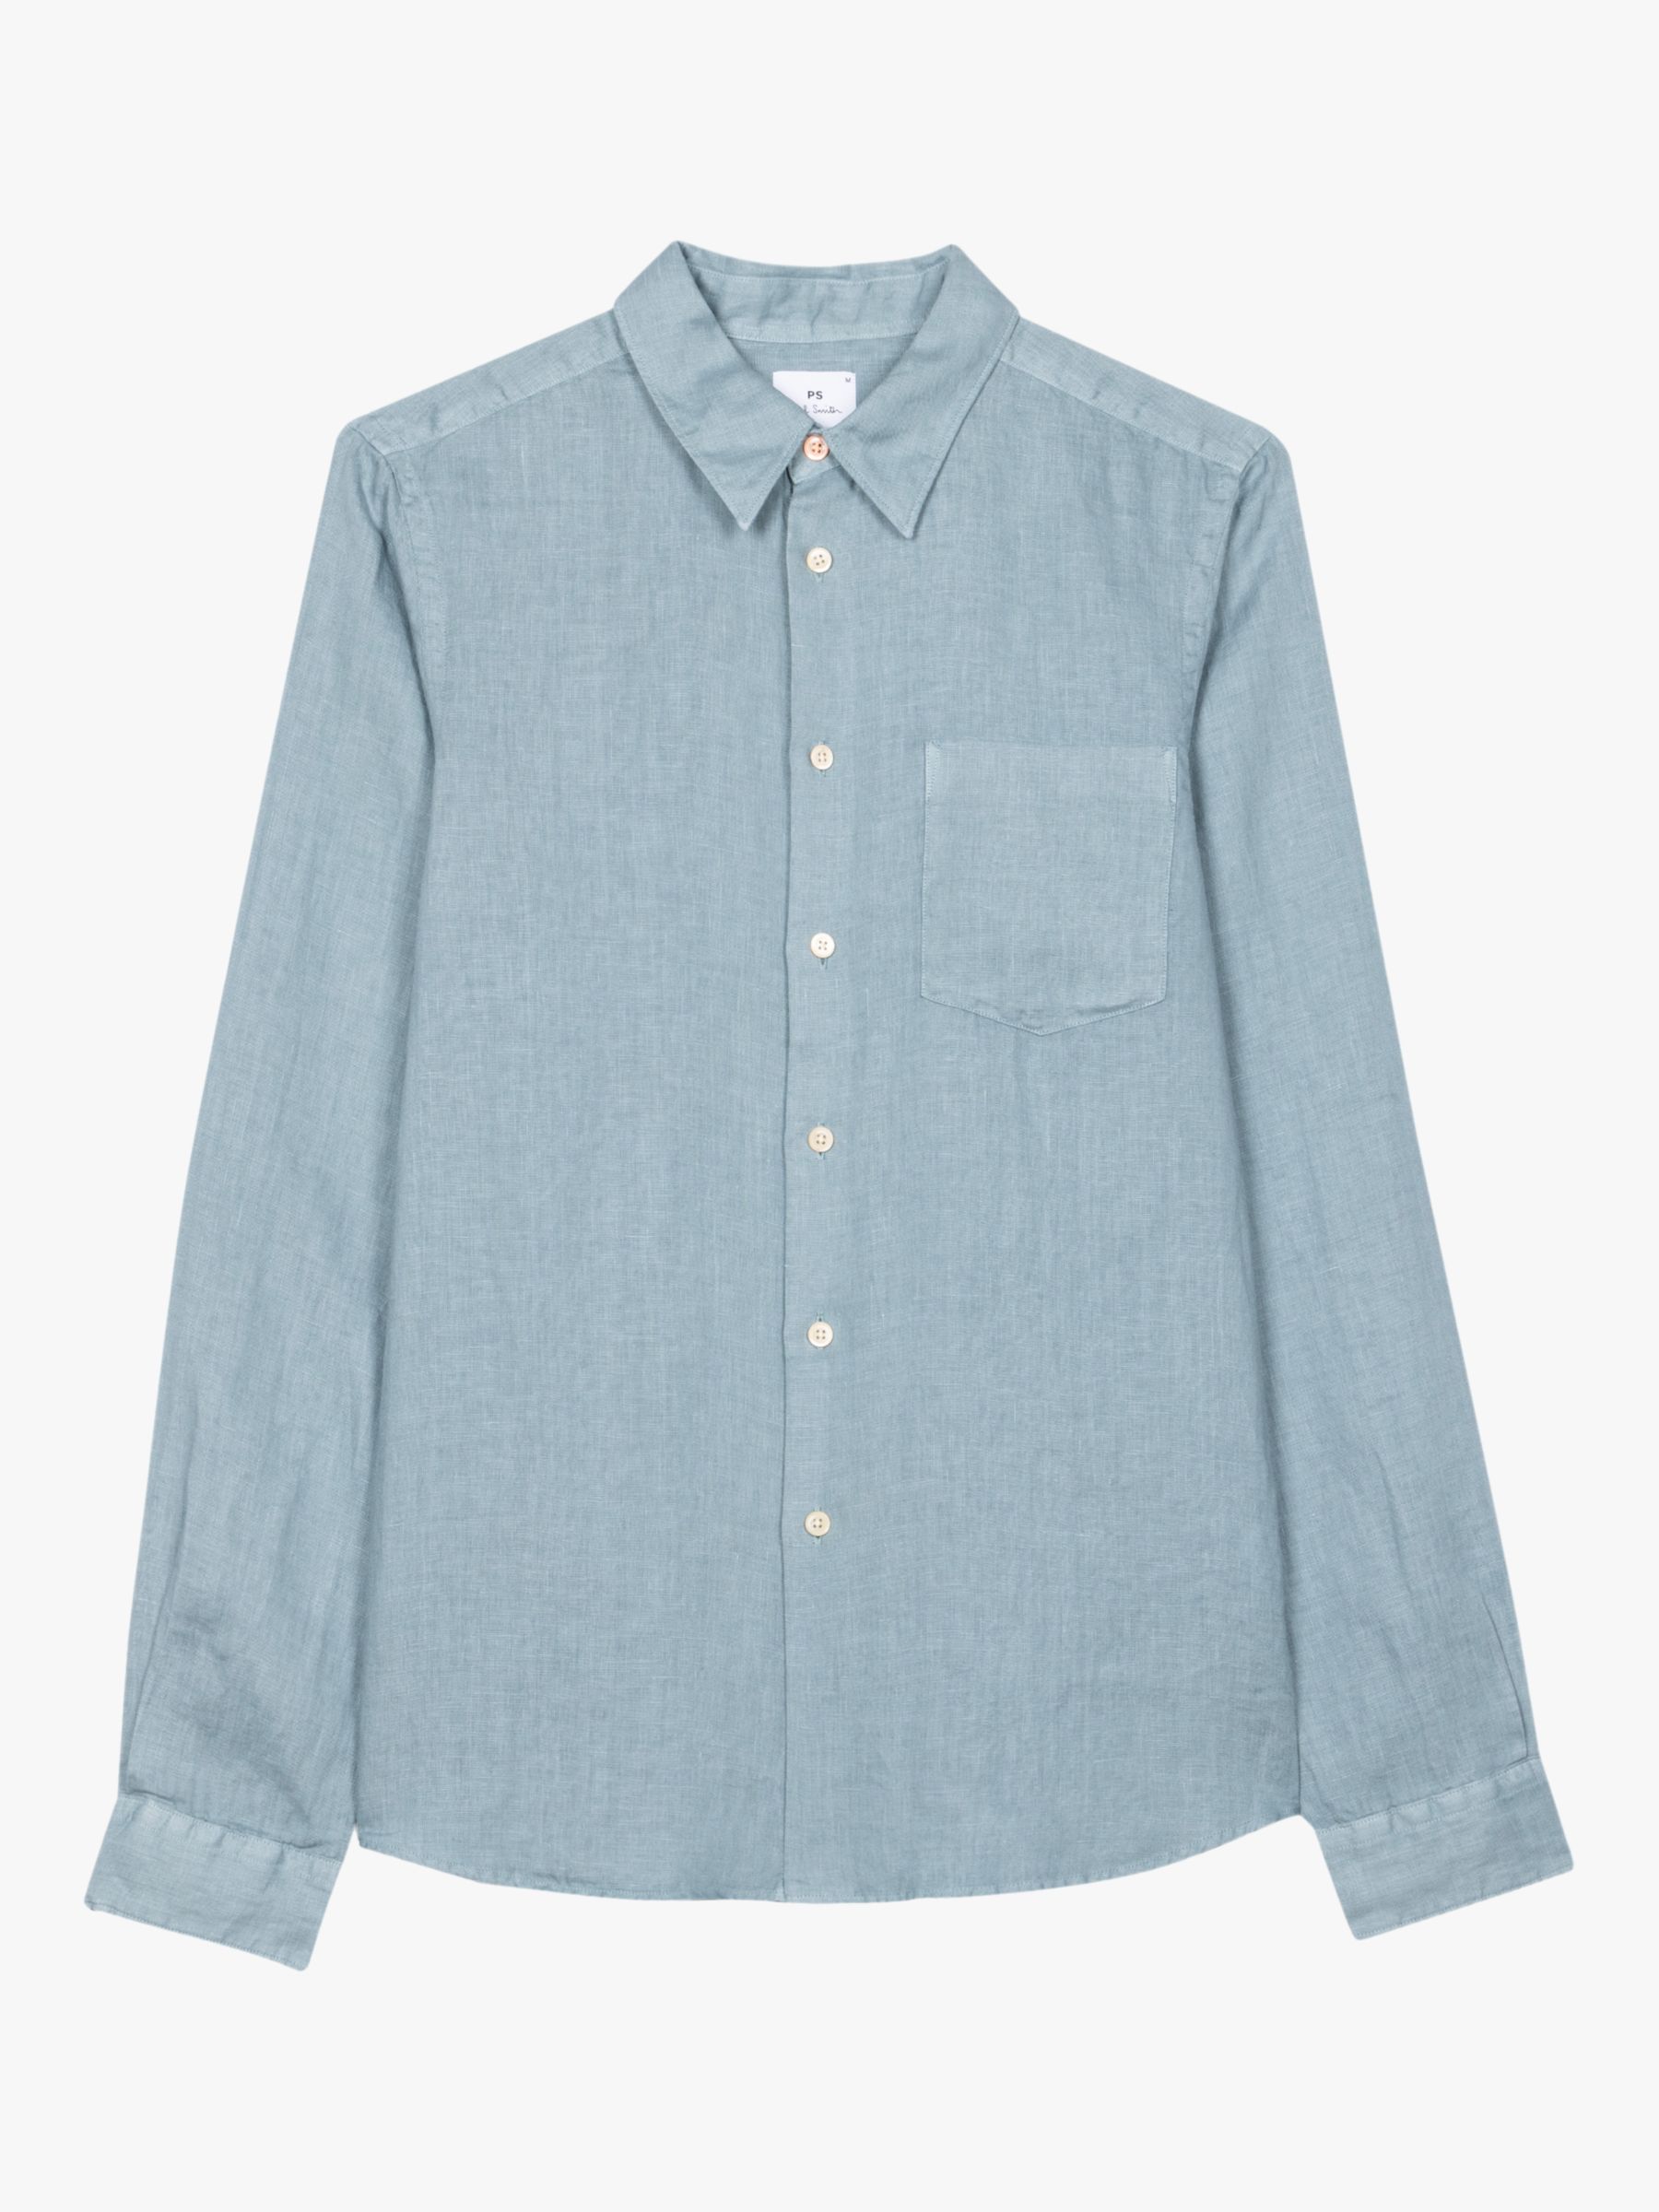 Paul Smith Long Sleeve Tailored Fit Shirt, Blue at John Lewis & Partners